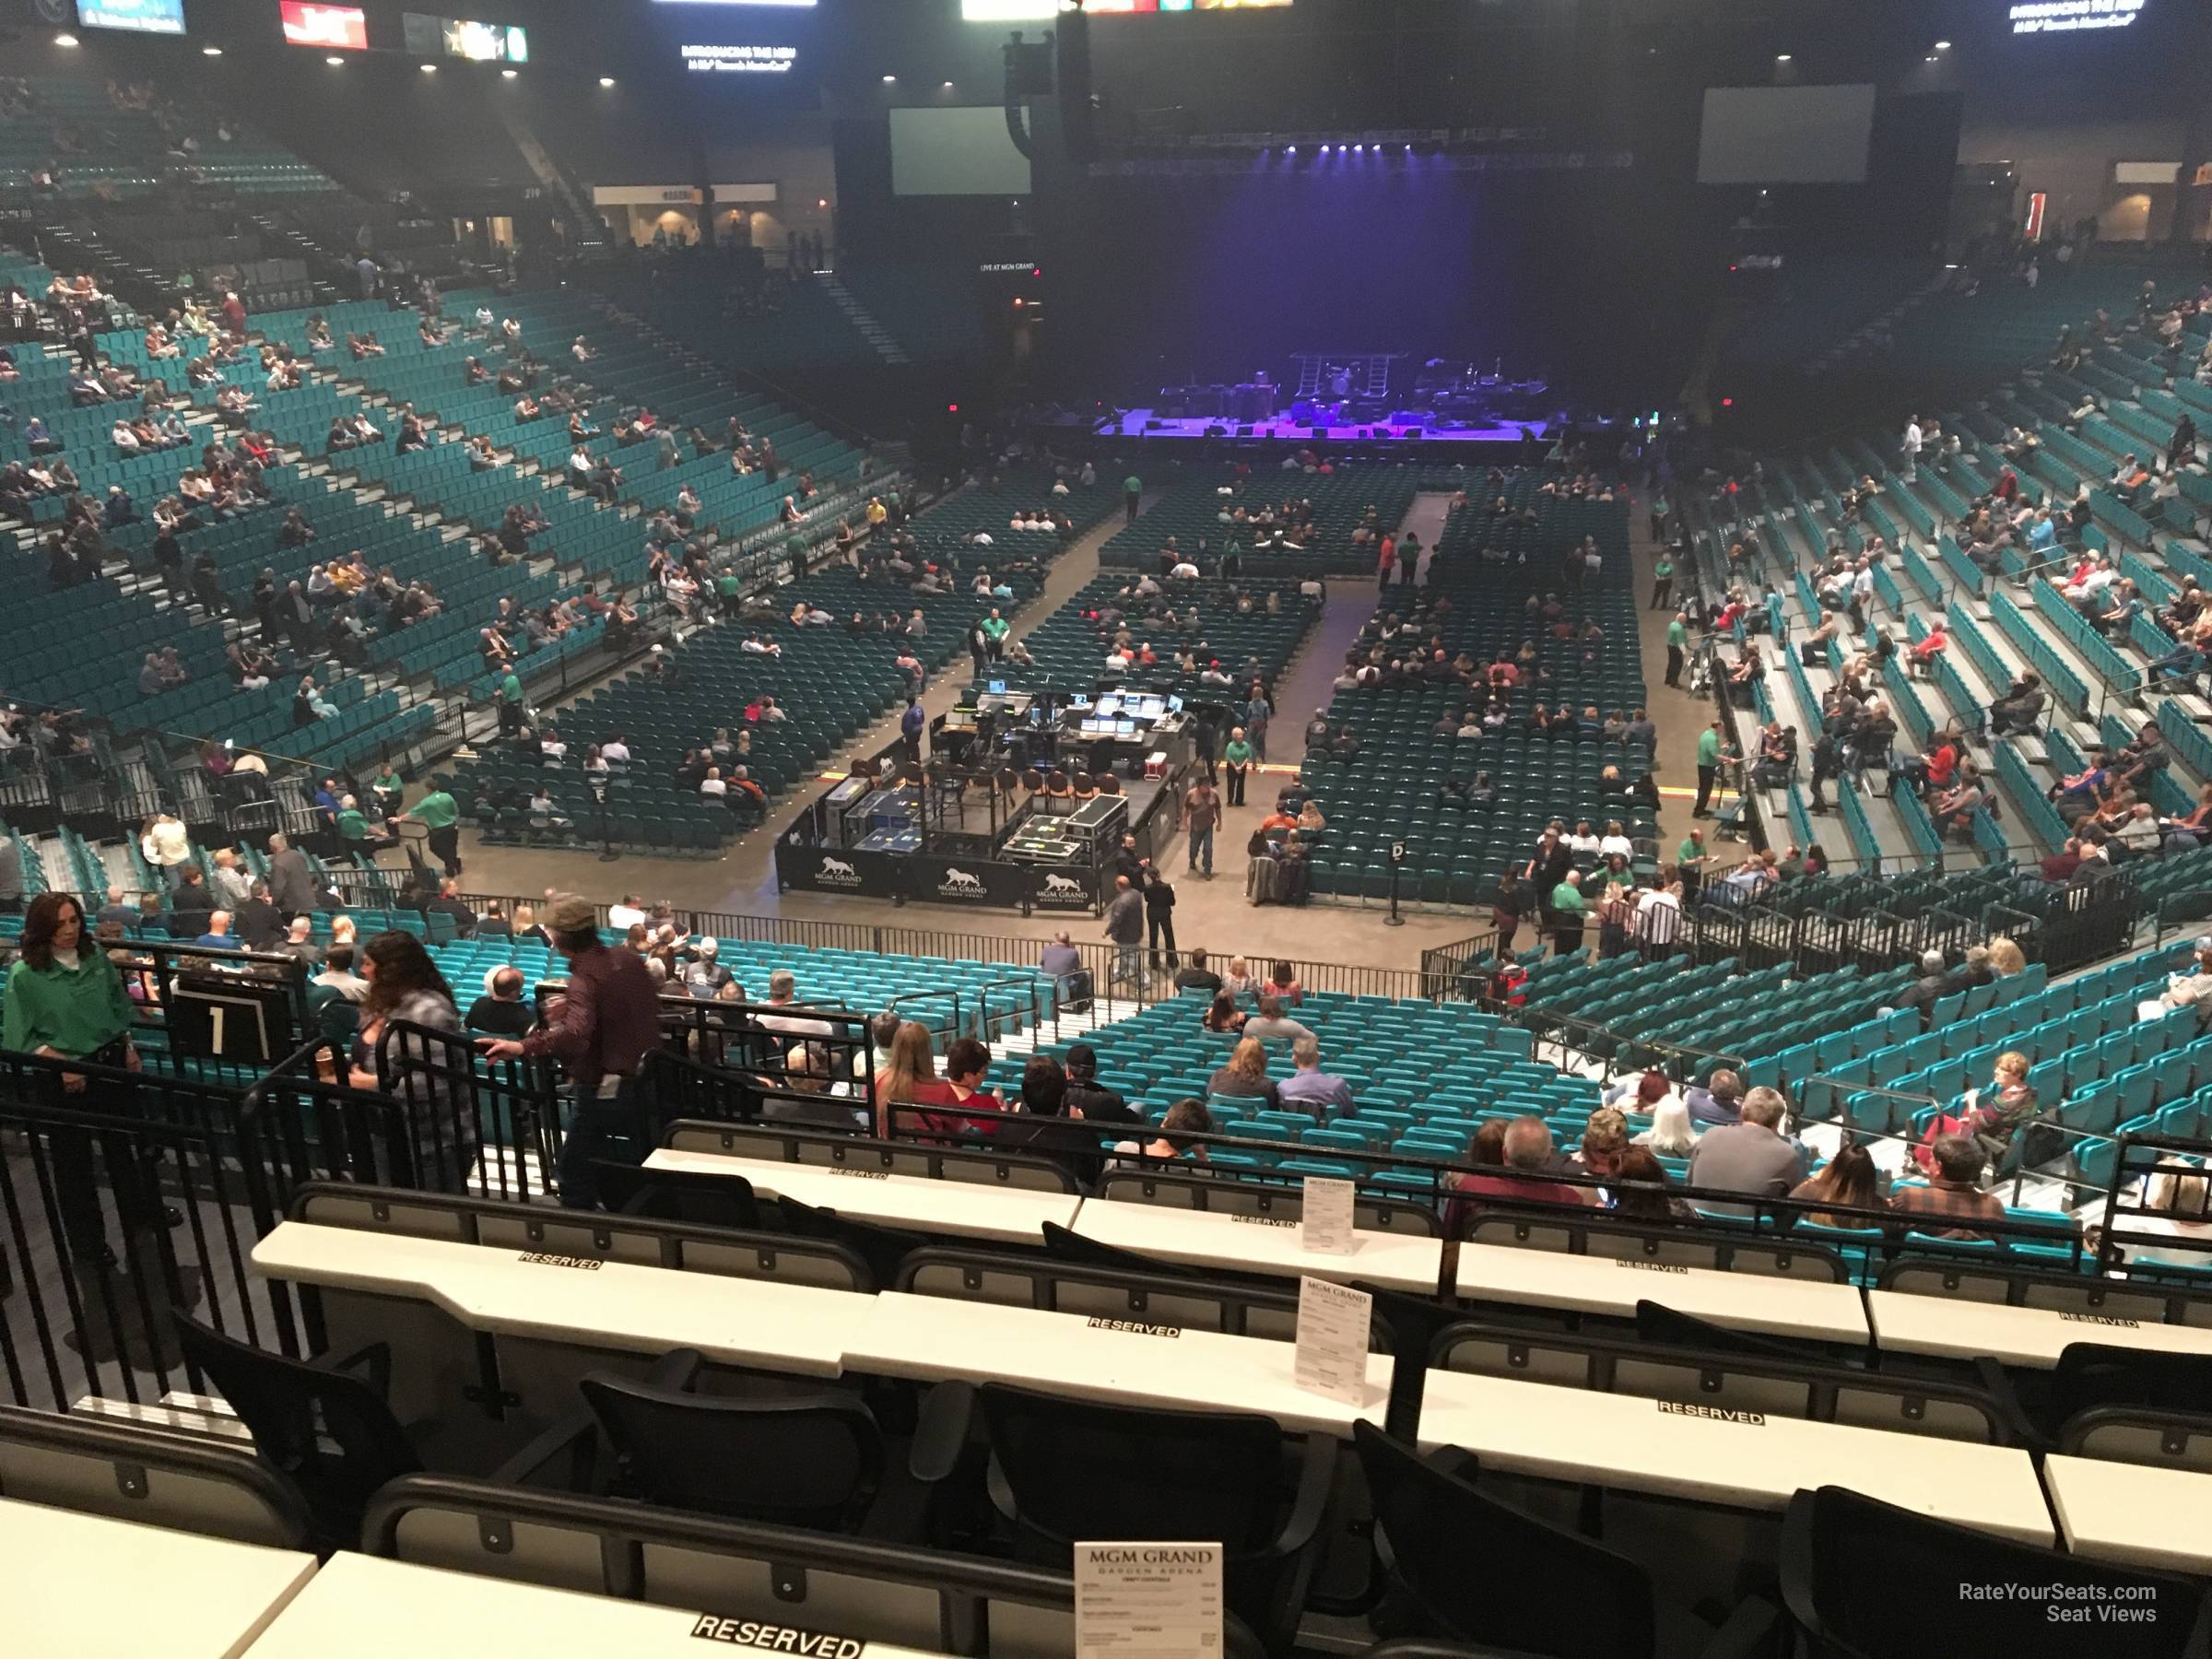 Mgm Grand Garden Arena Section 102 Rateyourseats Com